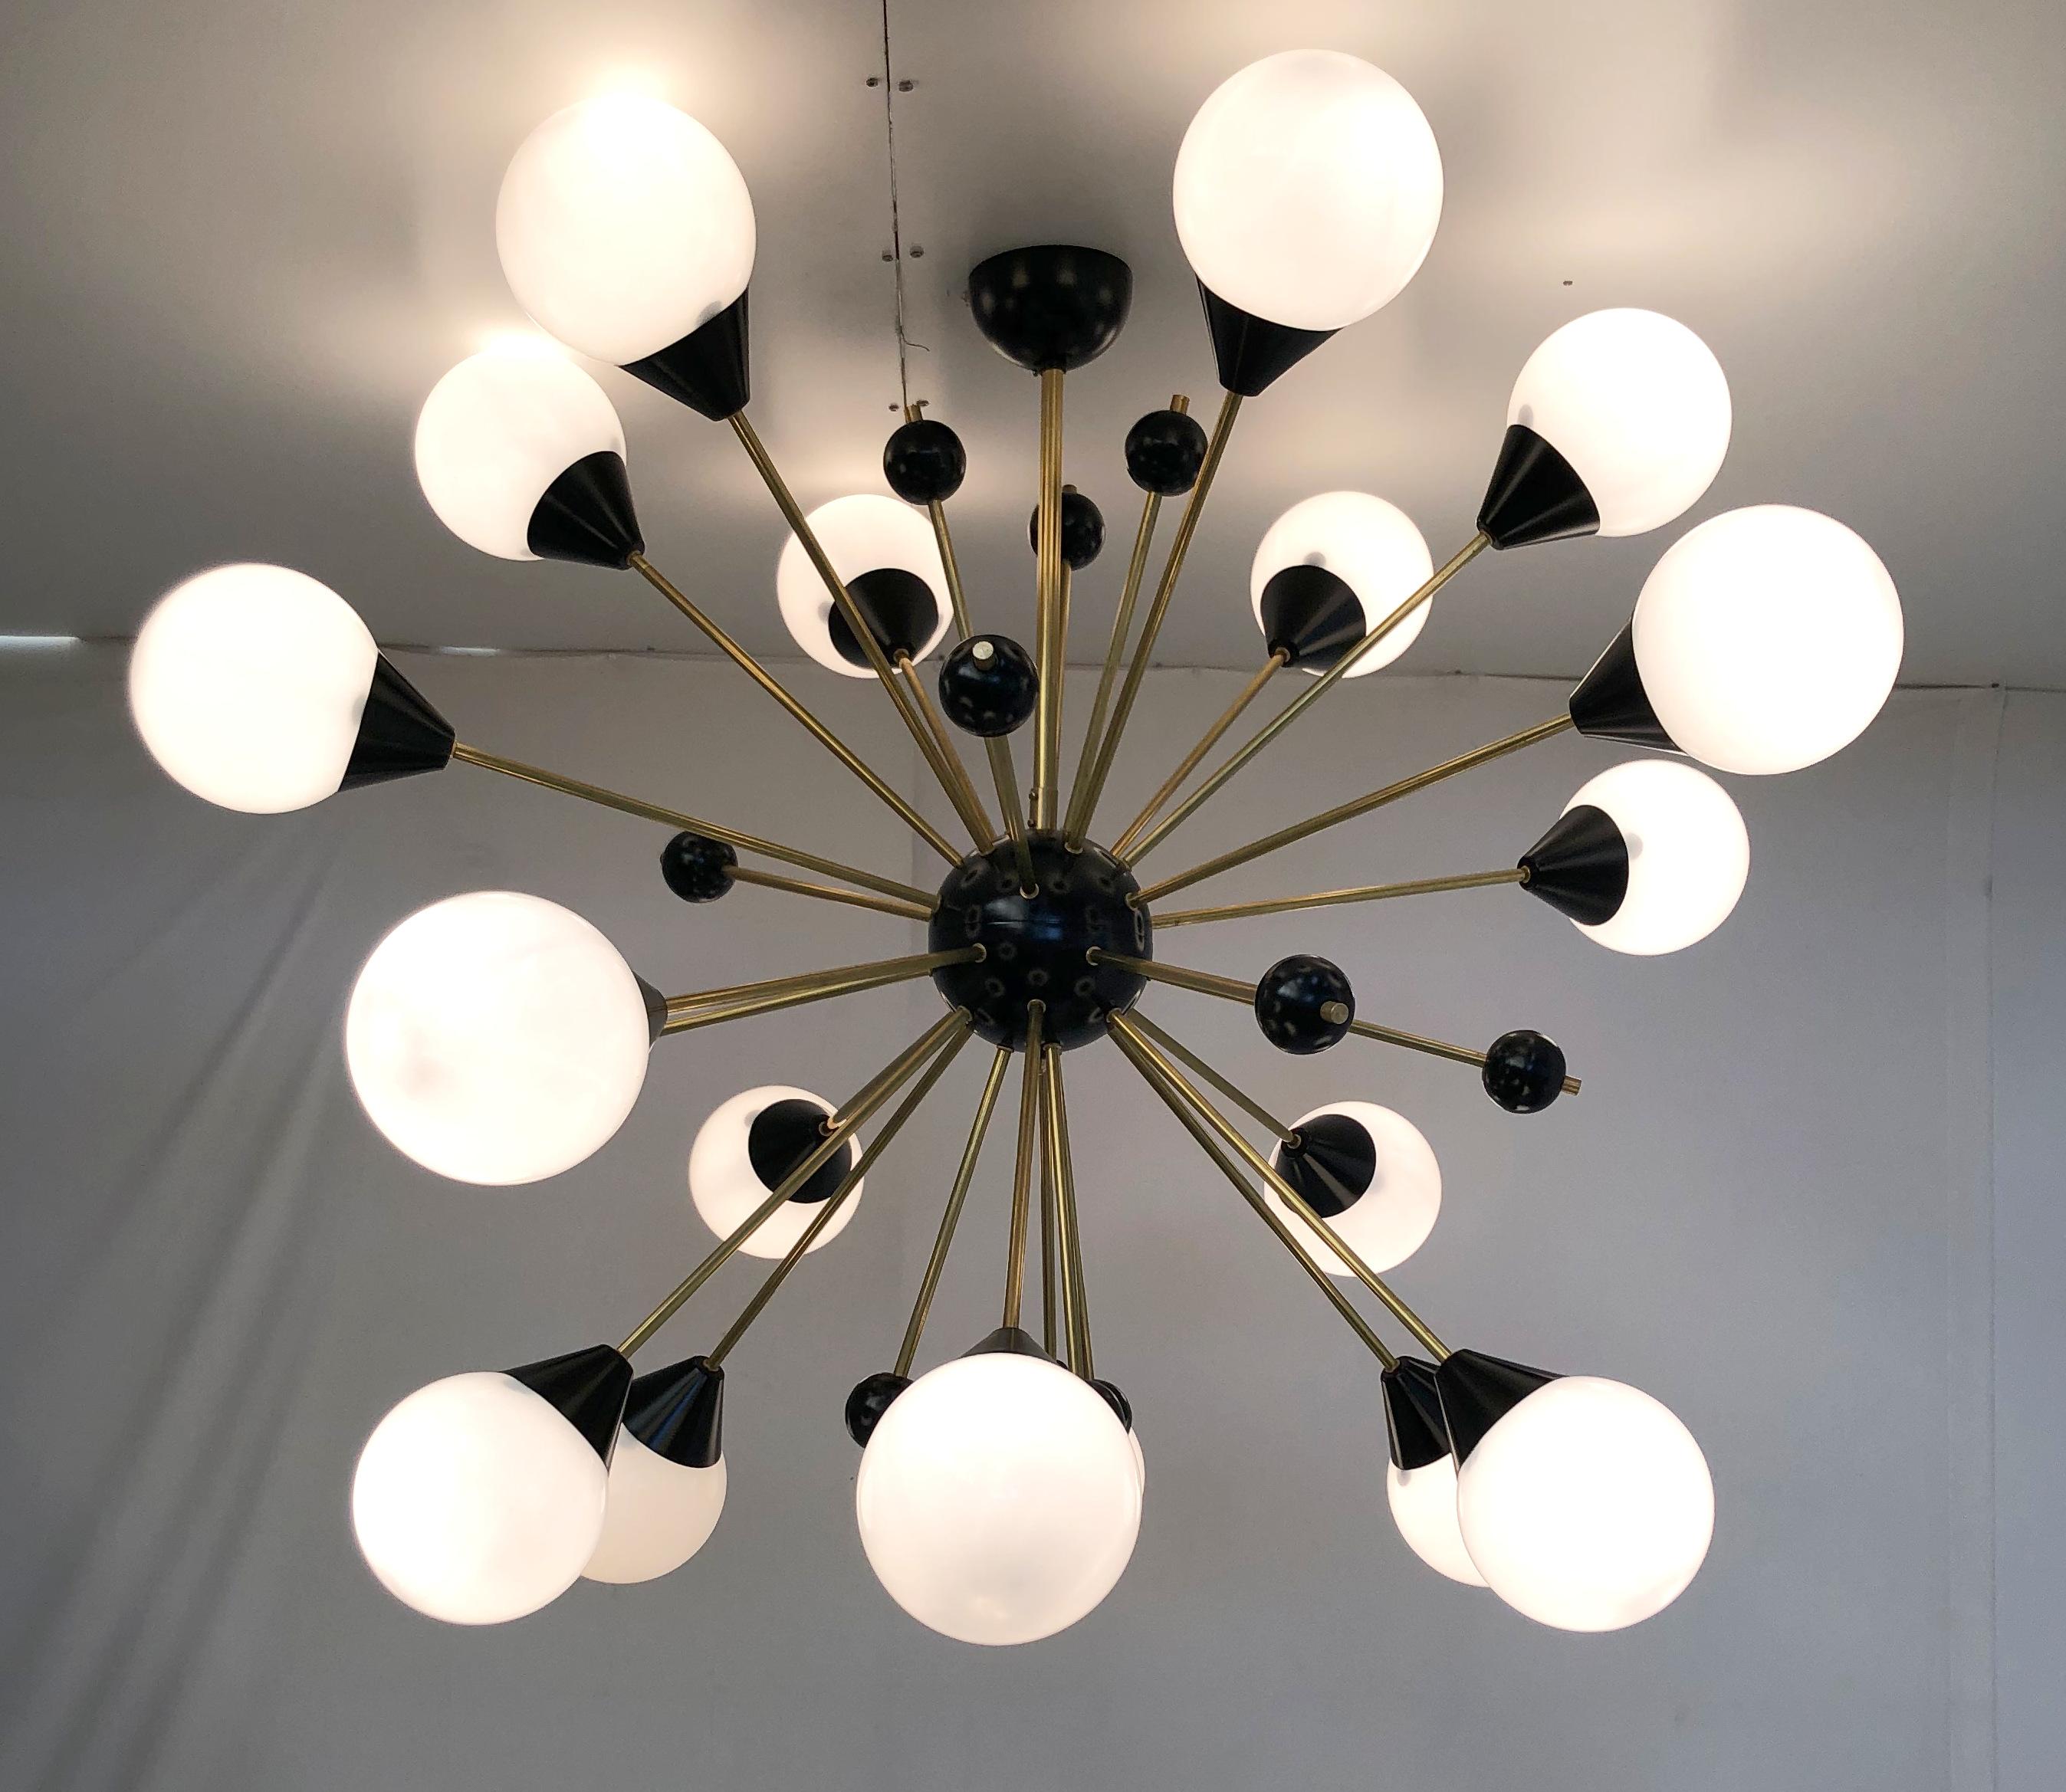 Italian midcentury style Sputnik chandelier with 18 glossy white Murano glass globes on unlacquered natural brass stems, with small black decorative globes, black center and ceiling canopy / designed by Fabio Bergomi for Fabio Ltd, made in